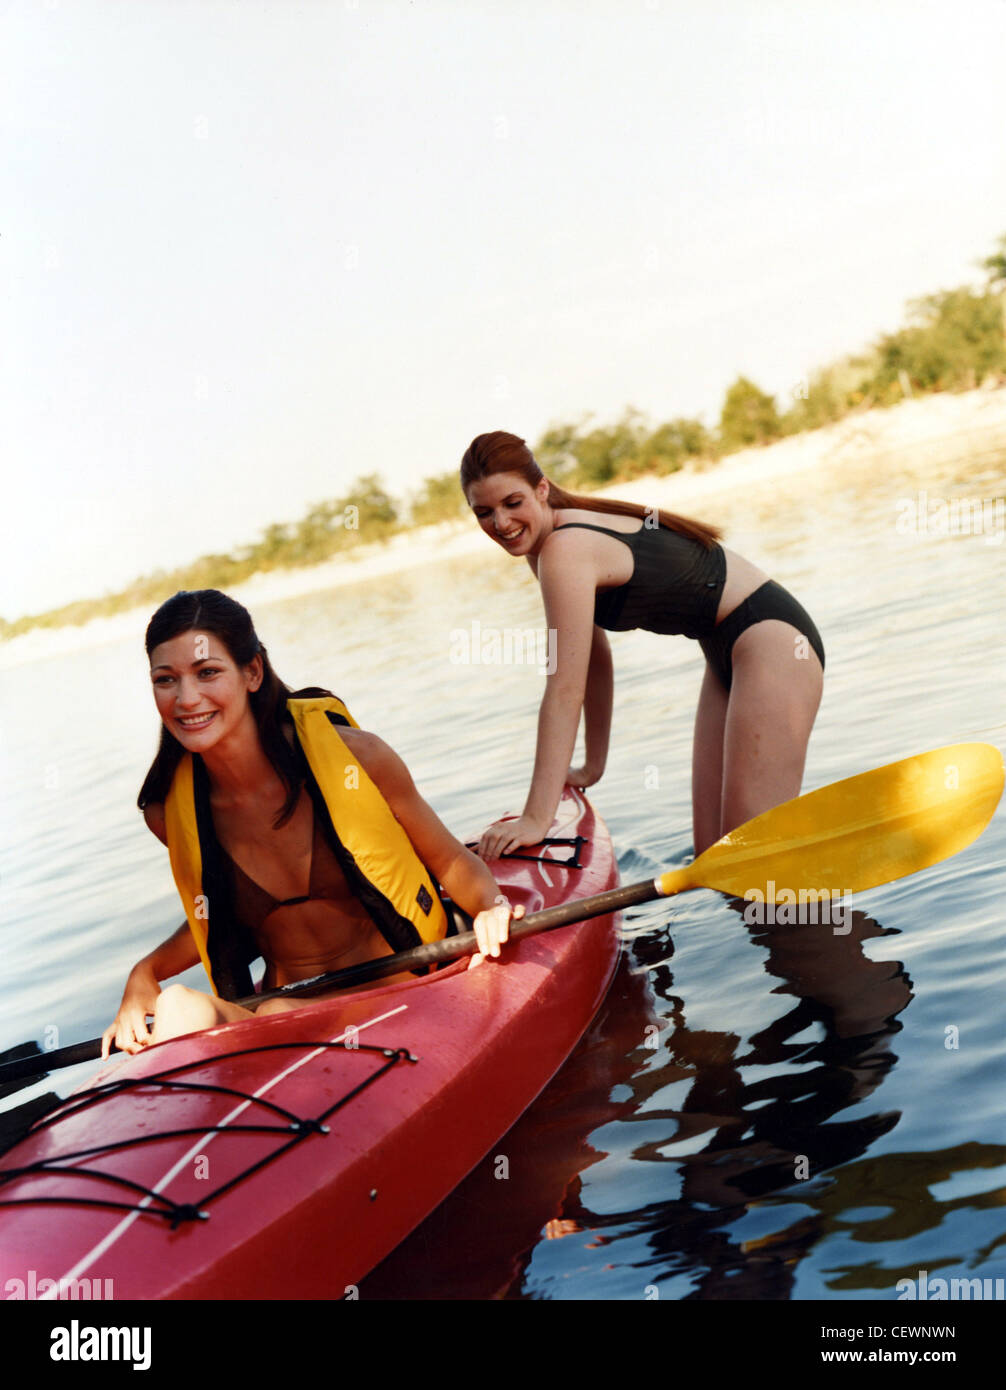 Female long brunette hair, wearing a yellow life vest, sitting in red kayak boat, holding a yellow paddle another female long Stock Photo